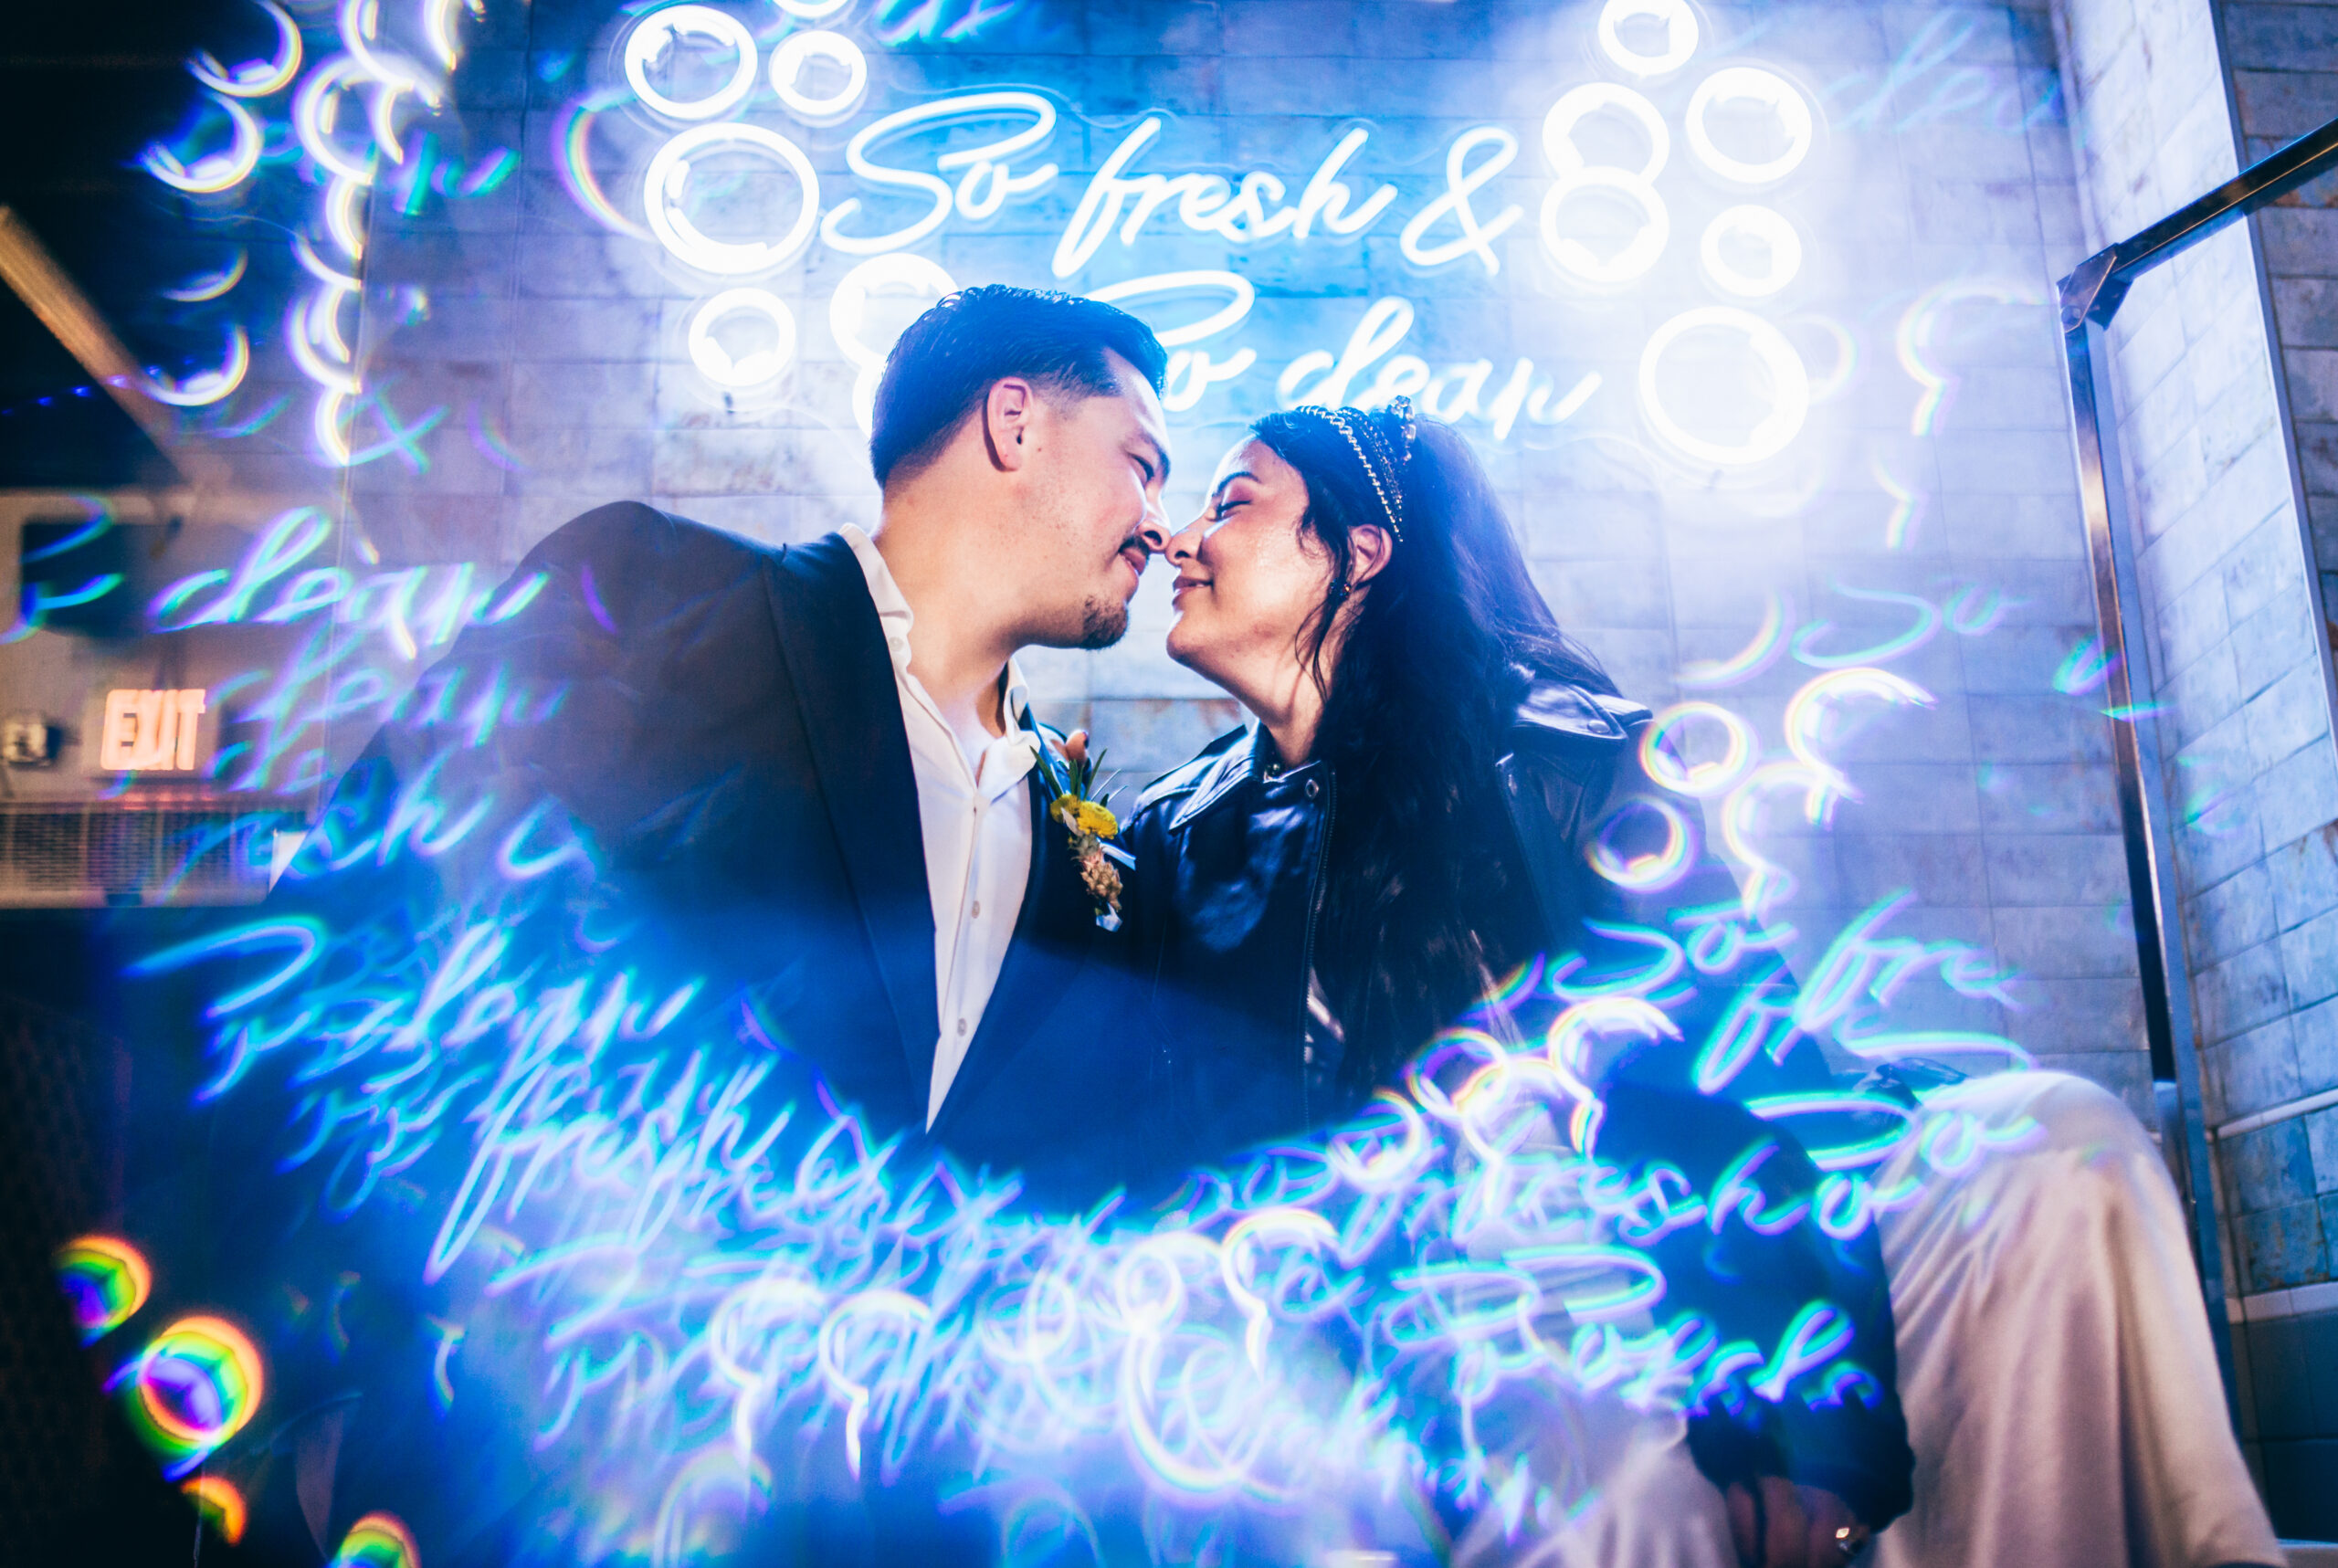 a groom in a suit jacket and bride in a leather jacket and white dress facing each other surrounded by blue neon lights from a sign that reads "so fresh & clean"